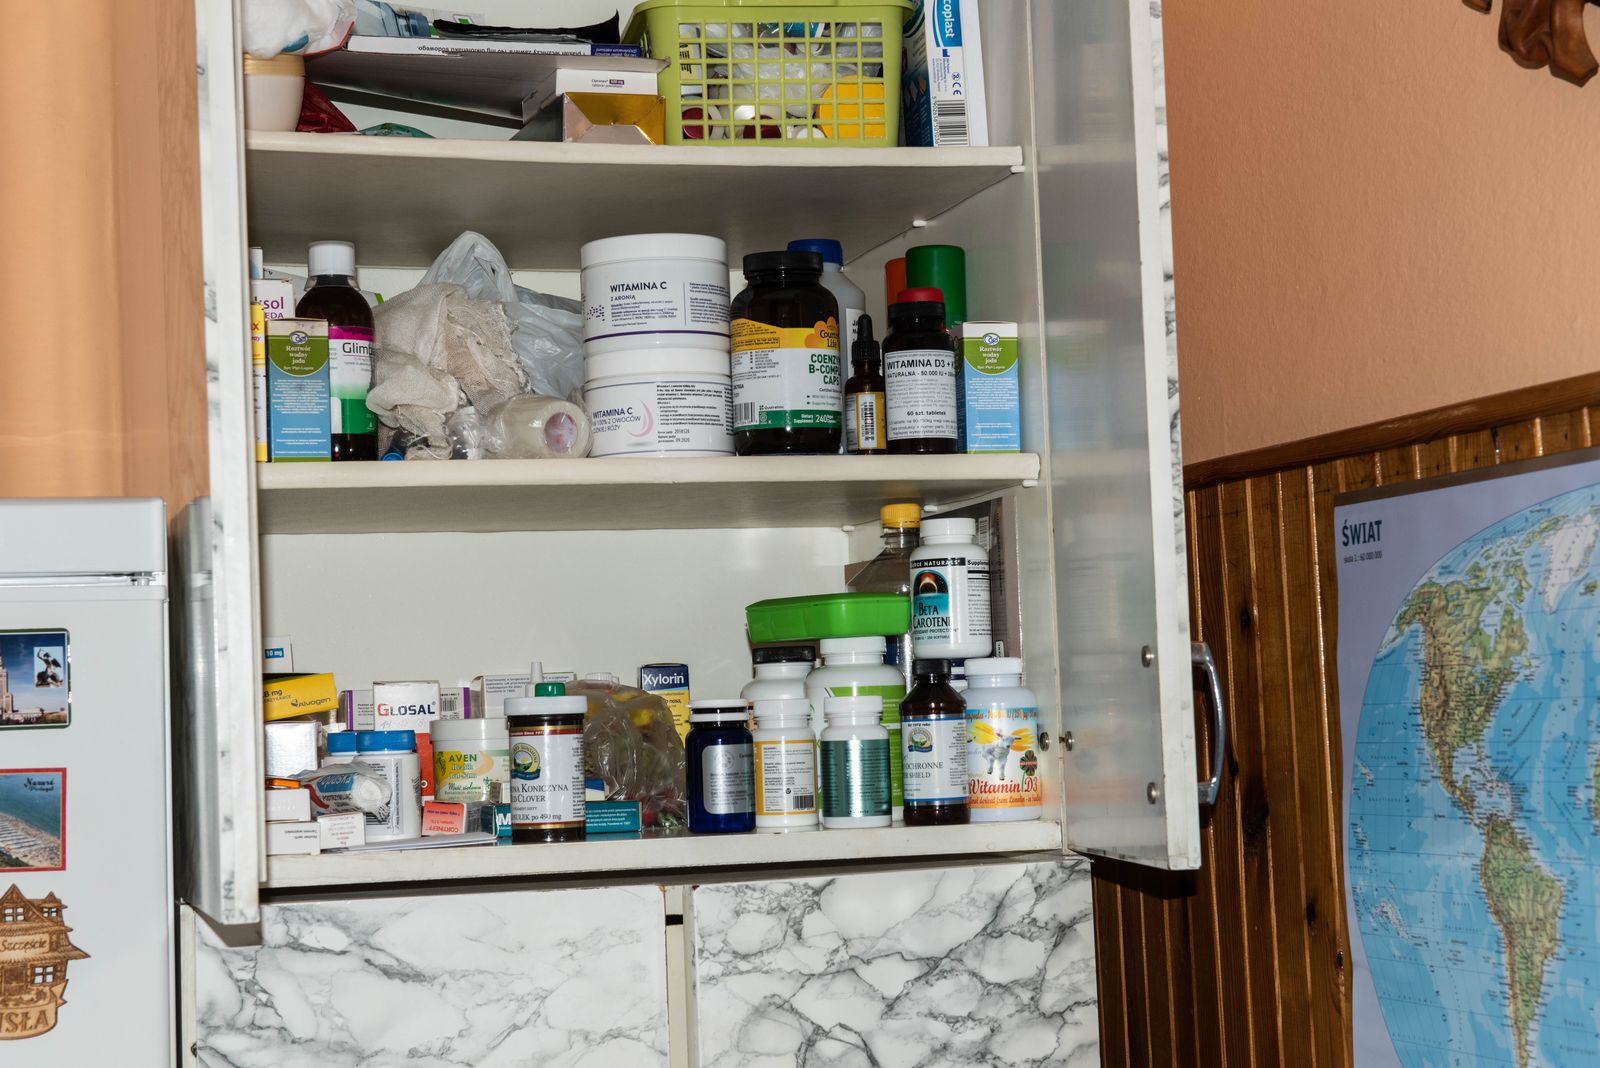 © Zula Rabikowska - There is a stereotype that Polish people are hypochondriacs. This is my grandad's cupboard.